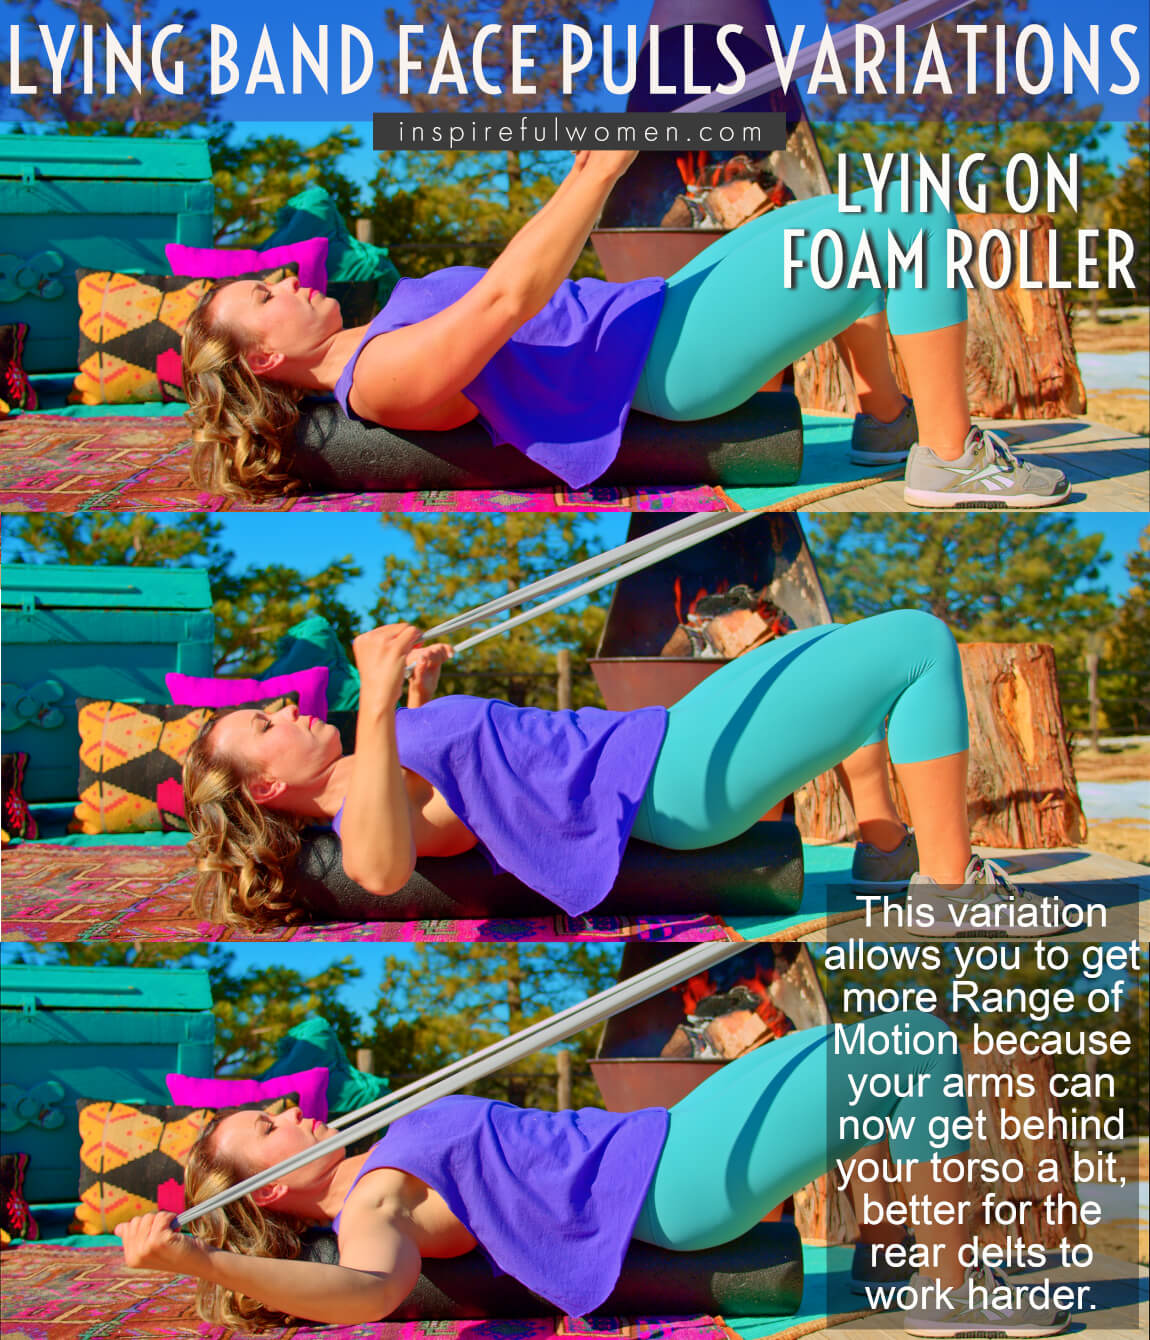 lying-on-foam-rollers-band-face-pulls-rear-delt-exercise-variations